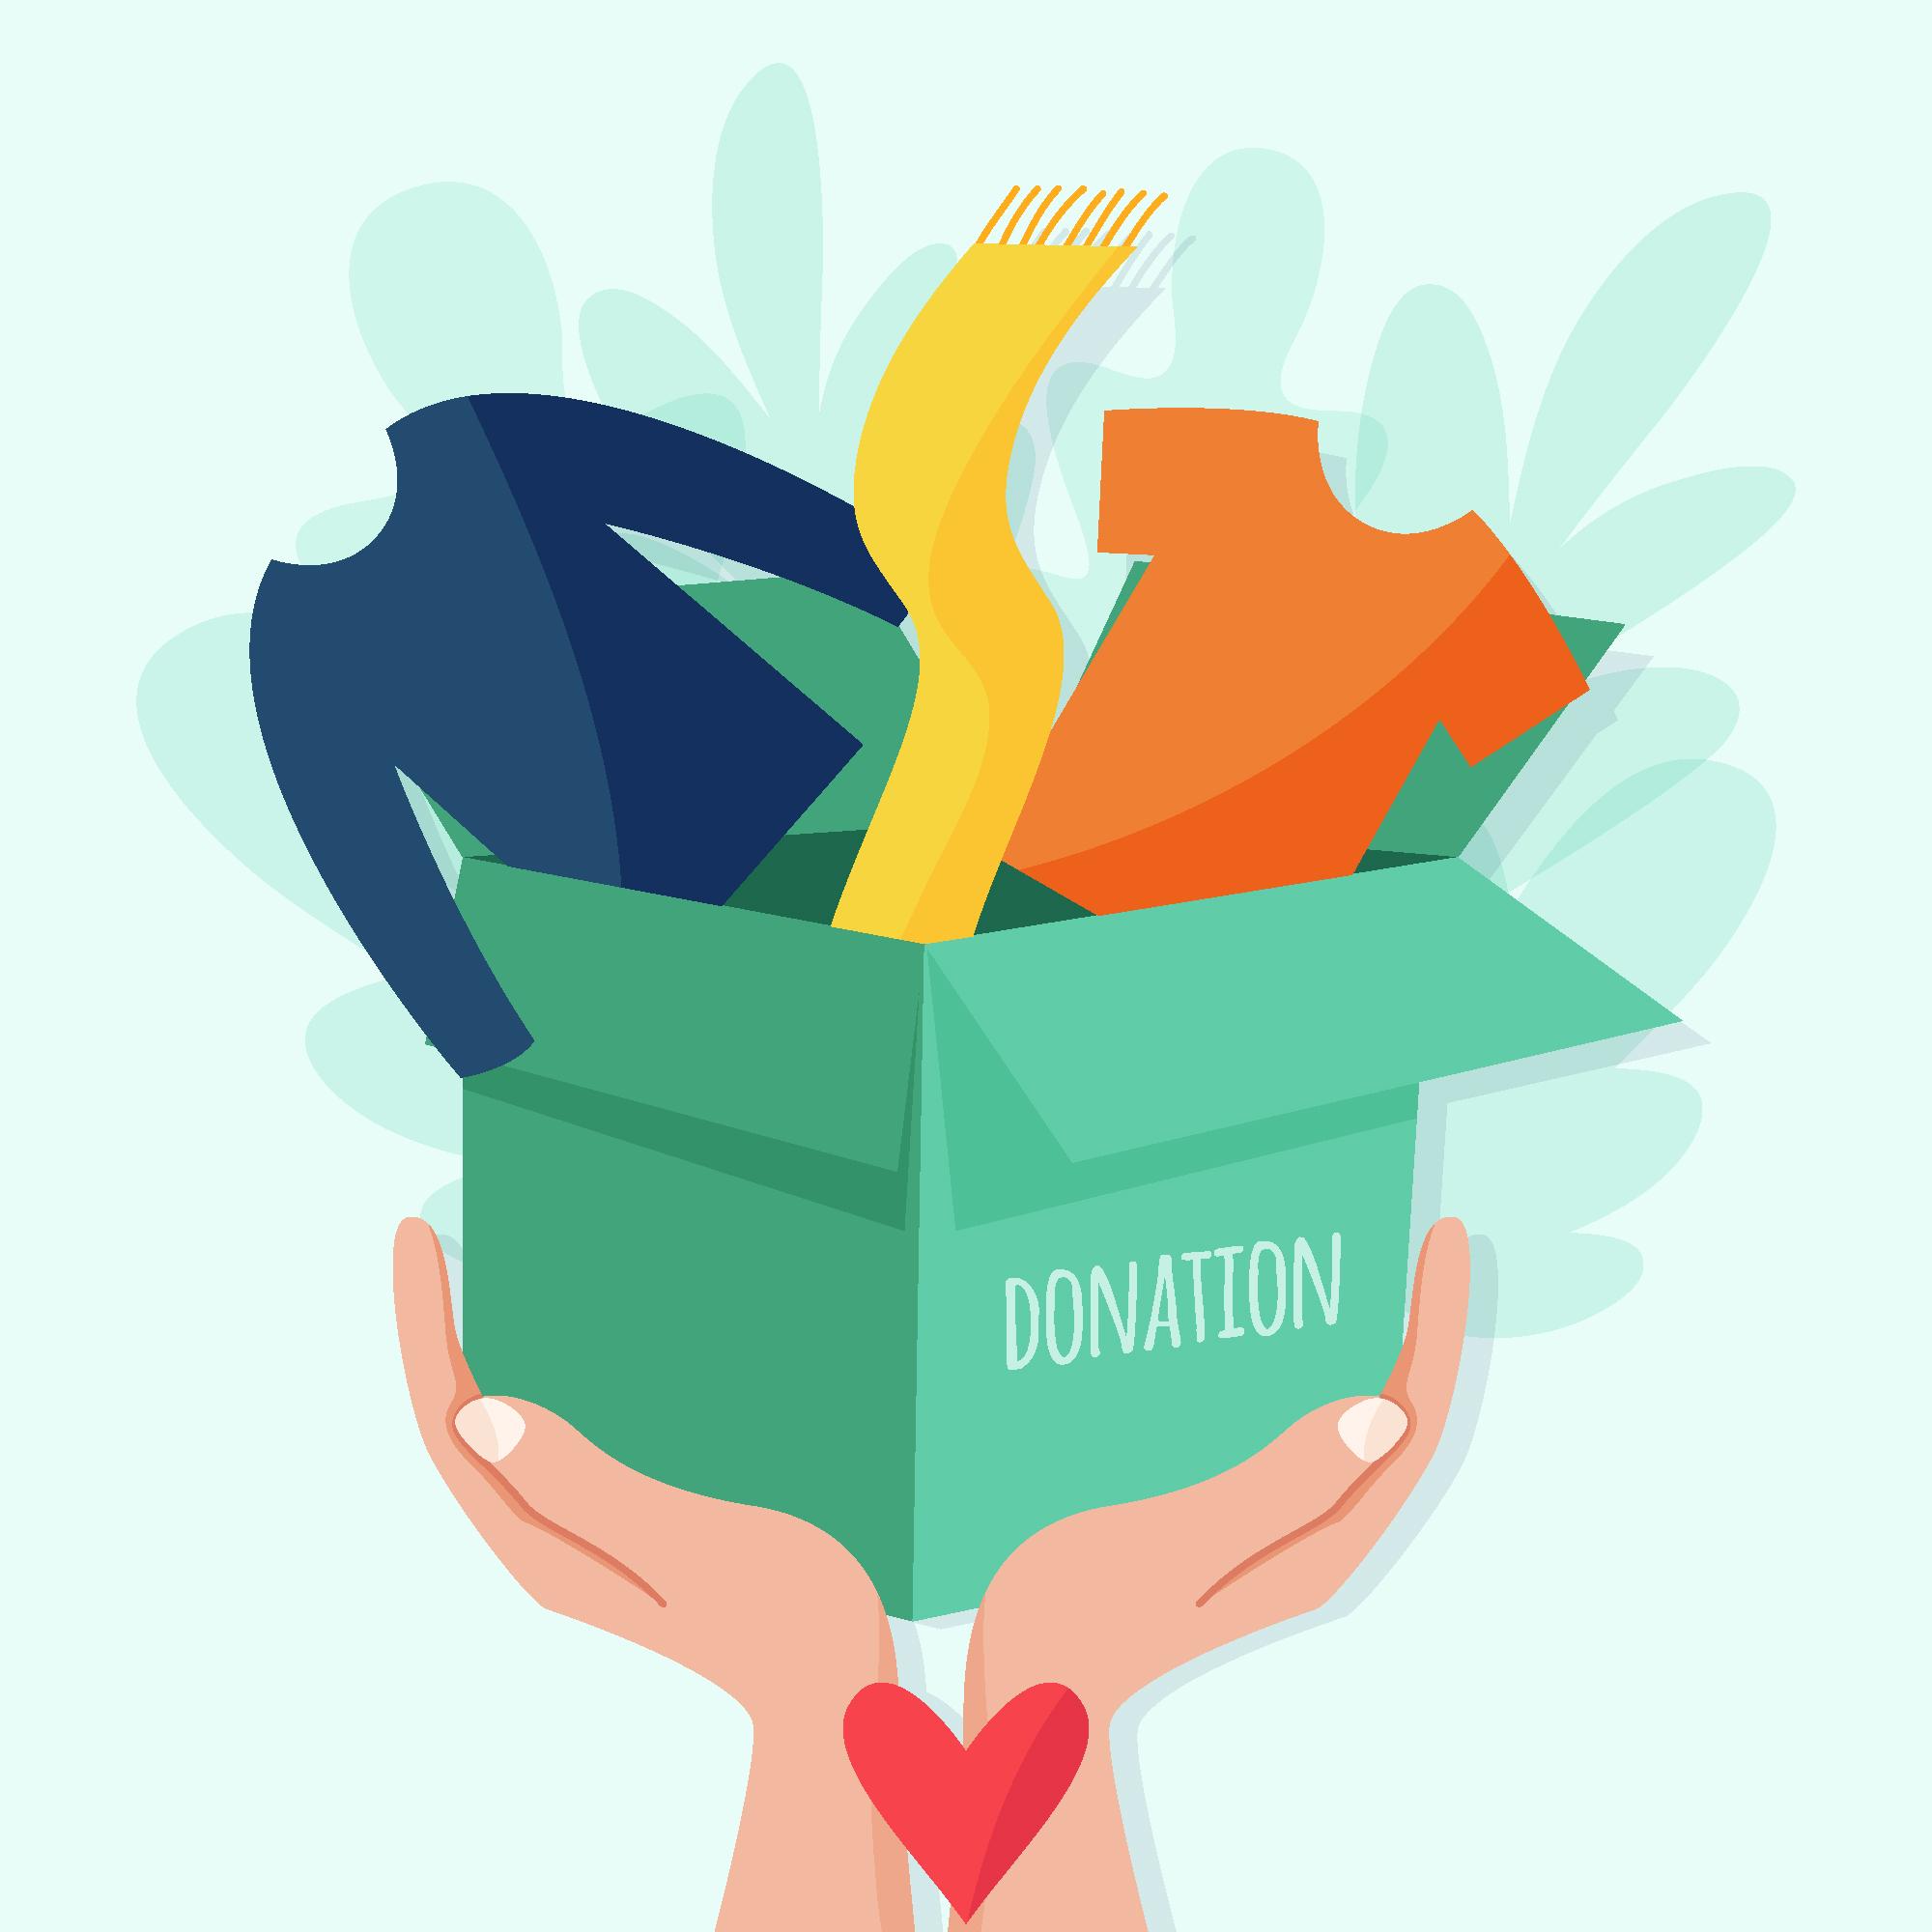 Benefits of a Donation Box at School | Giving School Supplies to Students.